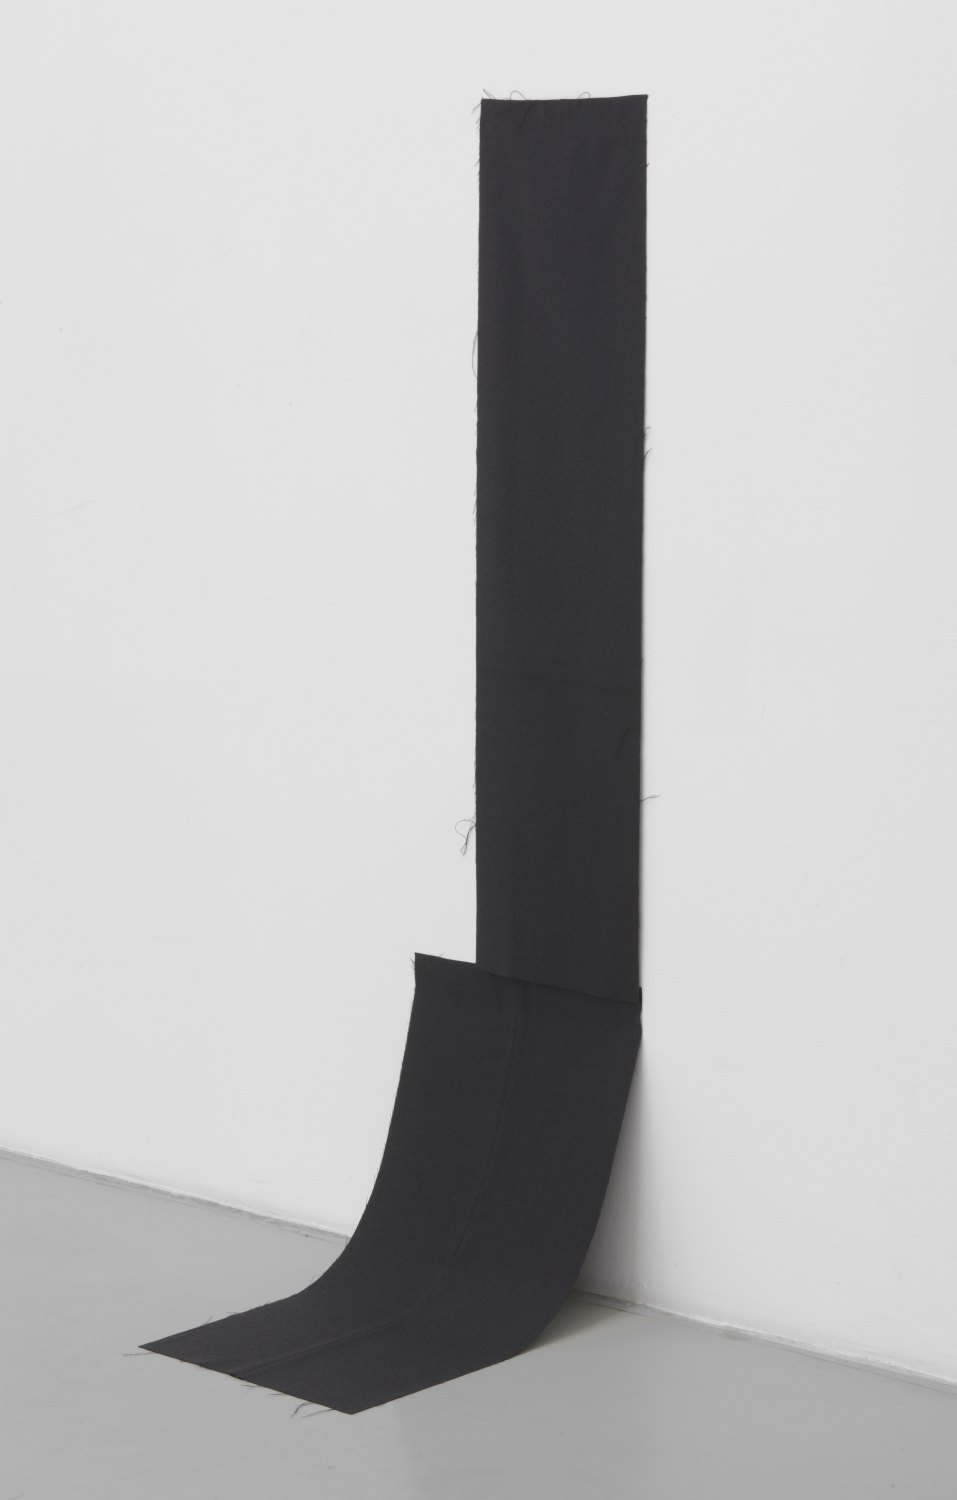 Kitty Kraus Untitled, 2008 Black fabric (two parts), 133 × 33 cm and 72 × 46 cm